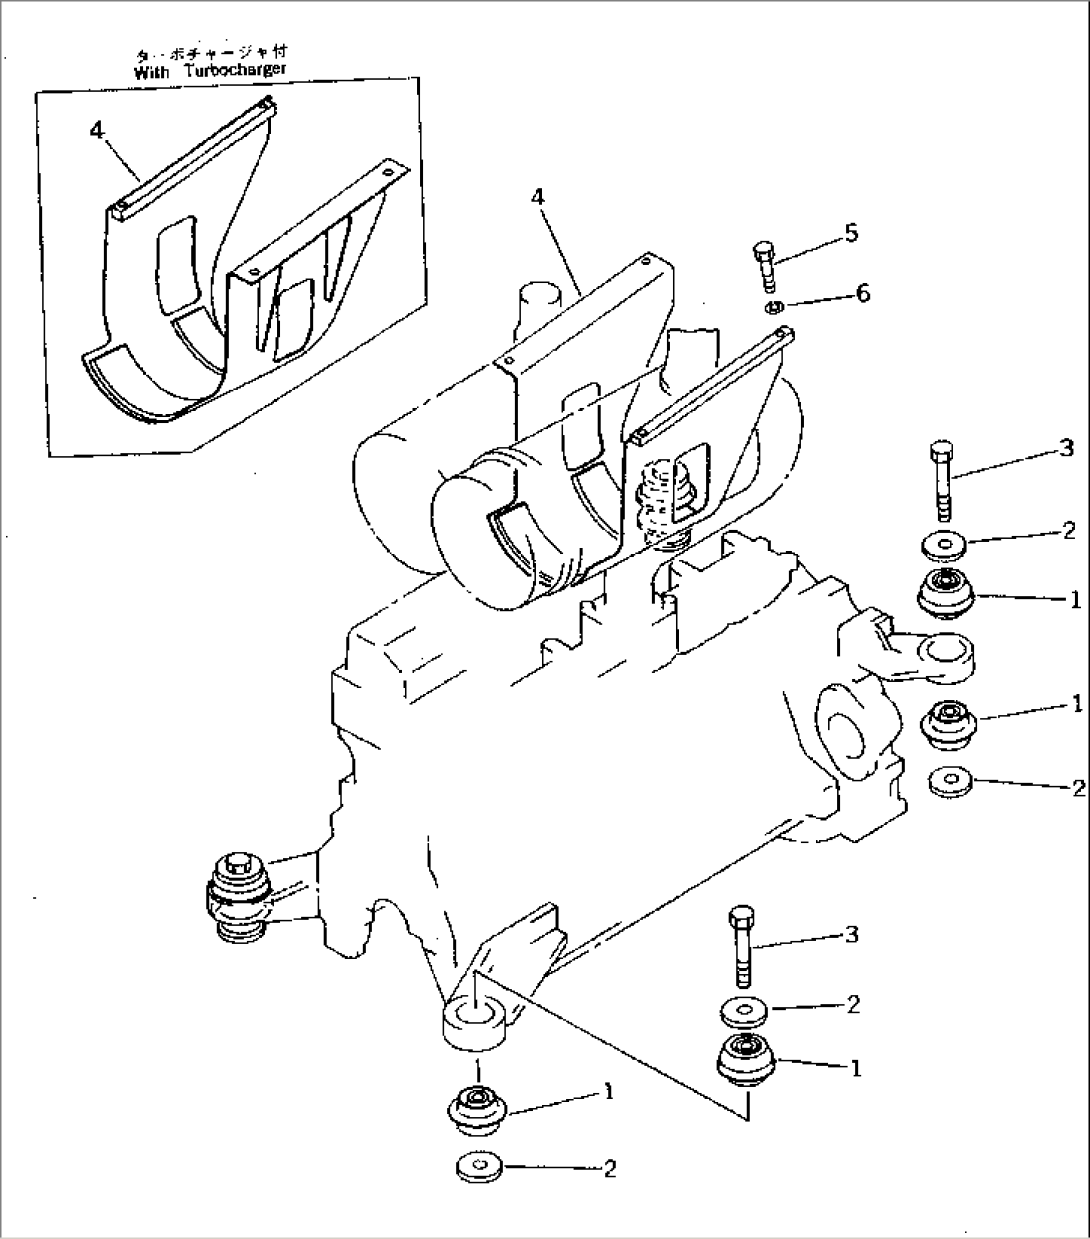 ENGINE MOUNTING PARTS(#41001-41183)